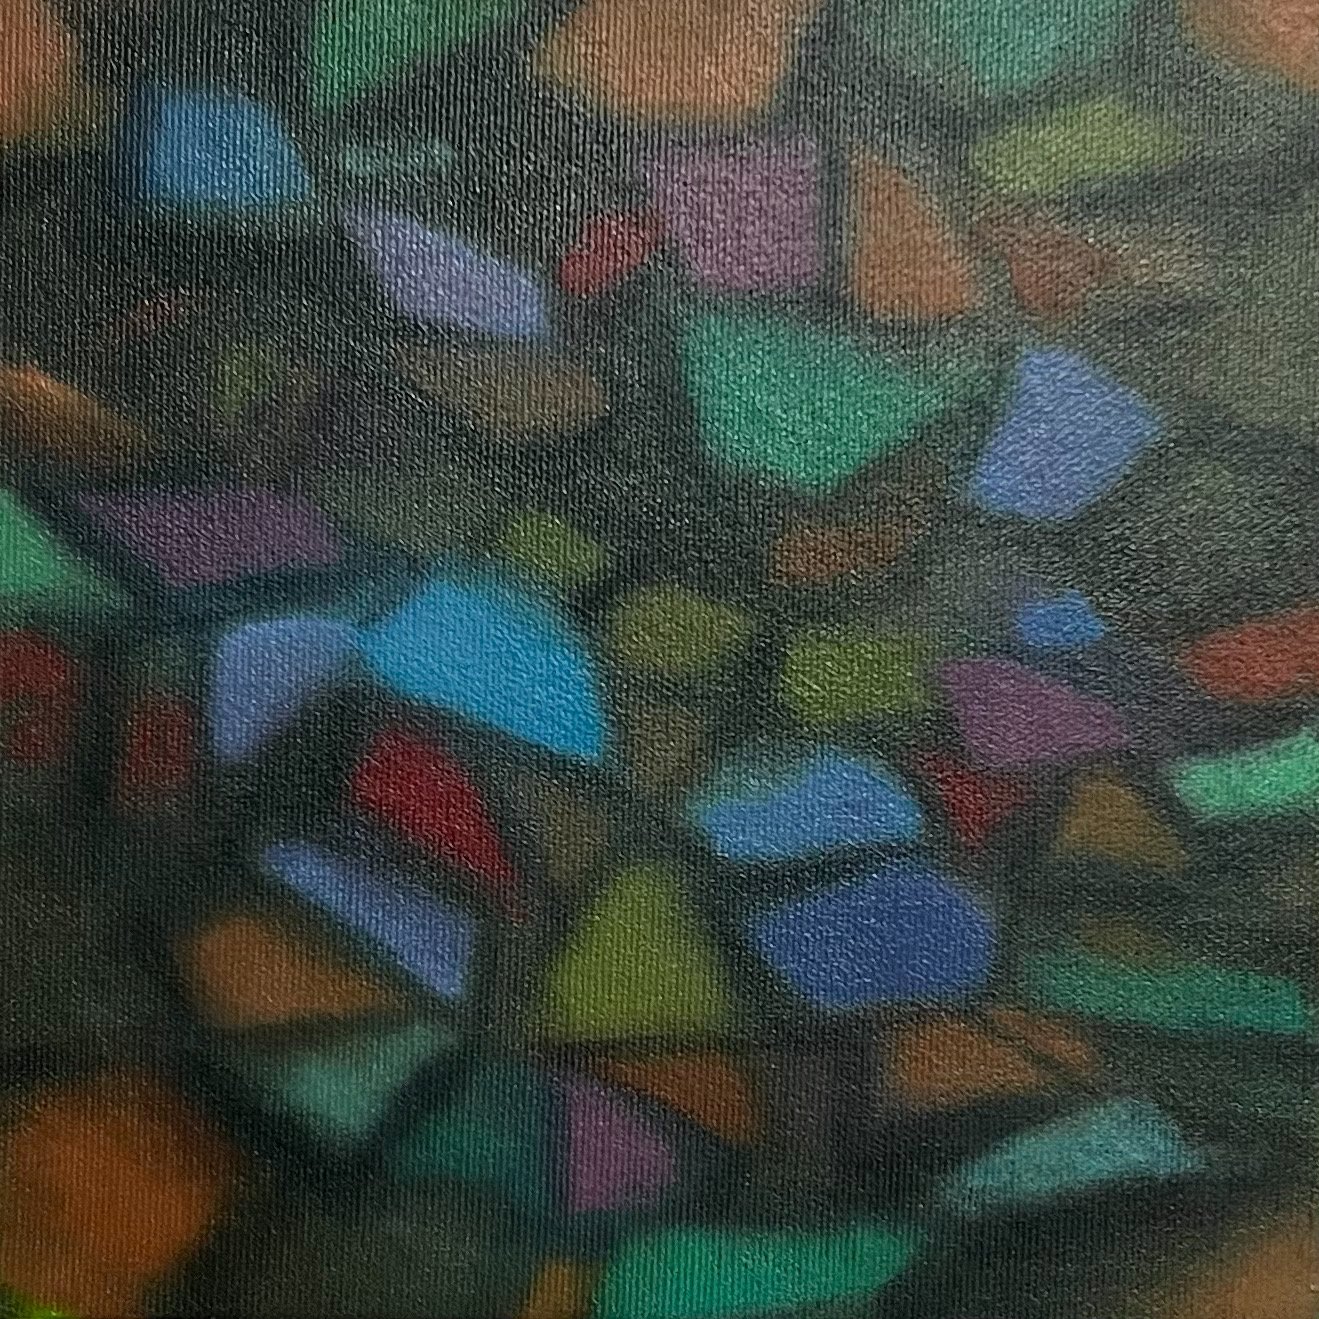 Colour study no.2 - ABEND IN N [After Klee] (2023)